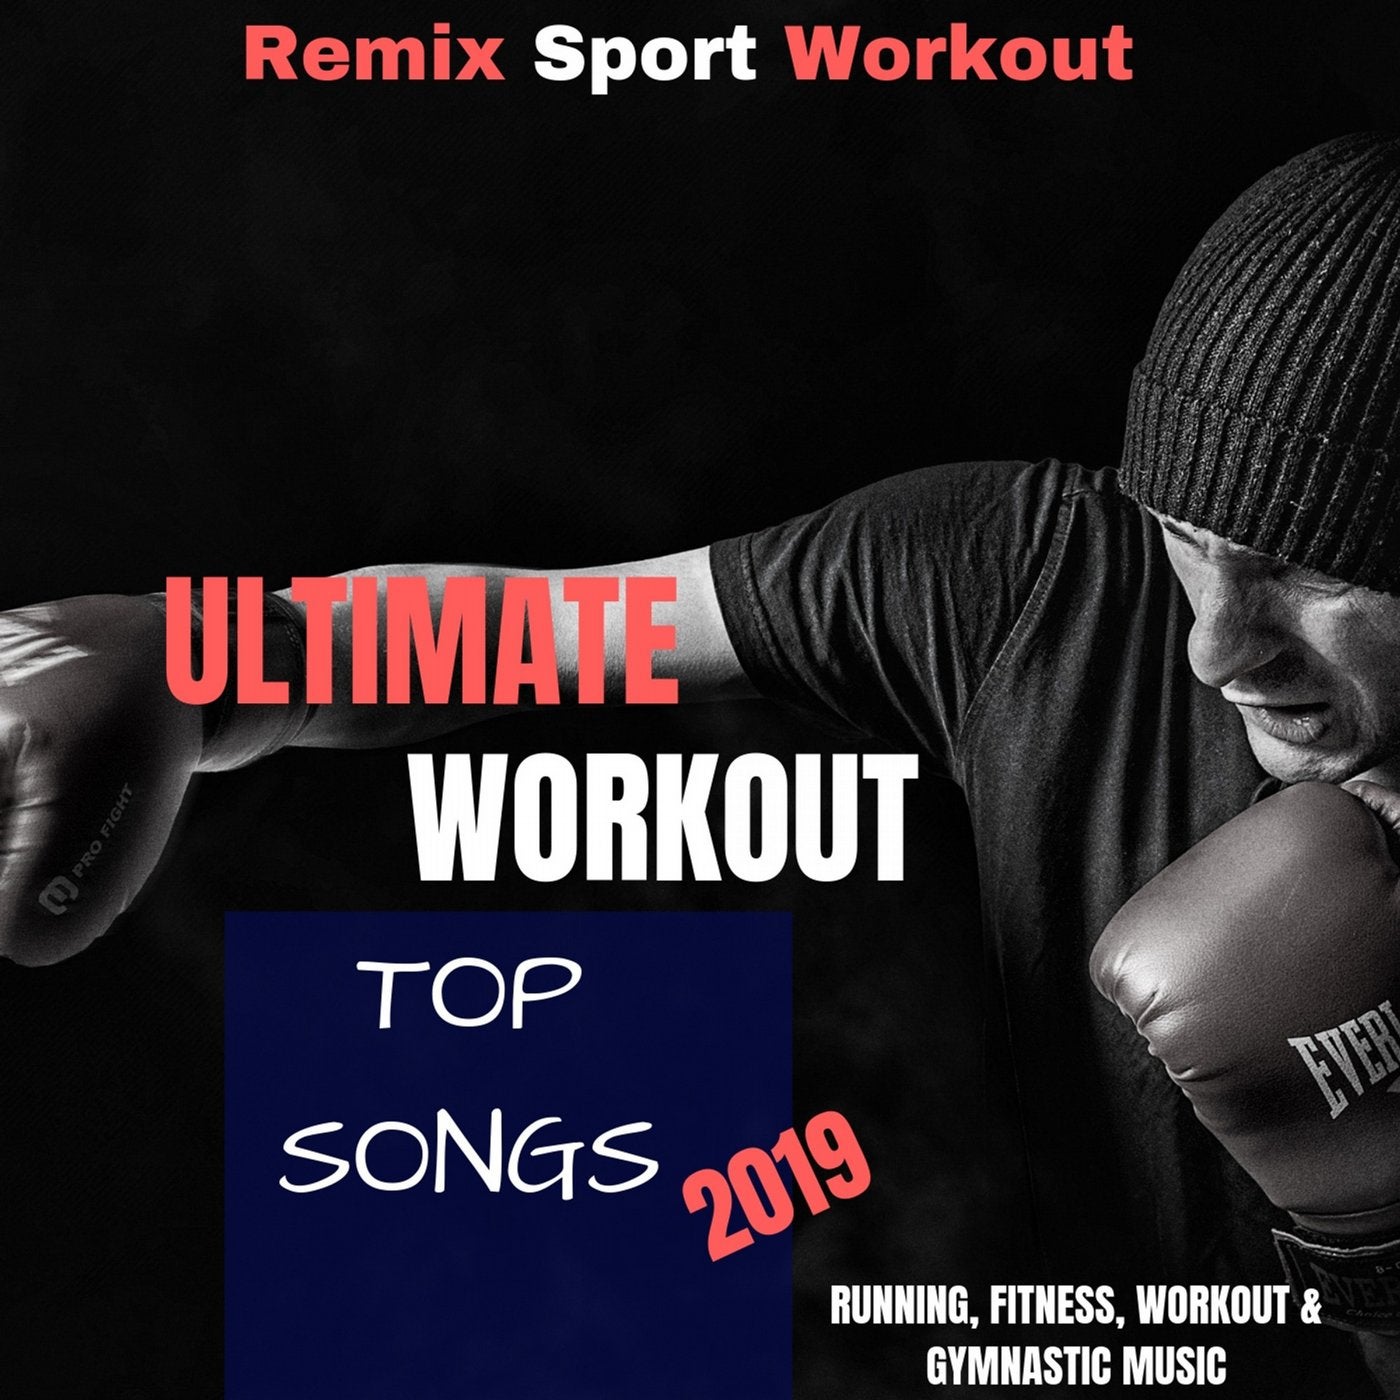 Ultimate Workout Top Songs 2019 (Running, Fitness, Workout & Gymnastic Music)